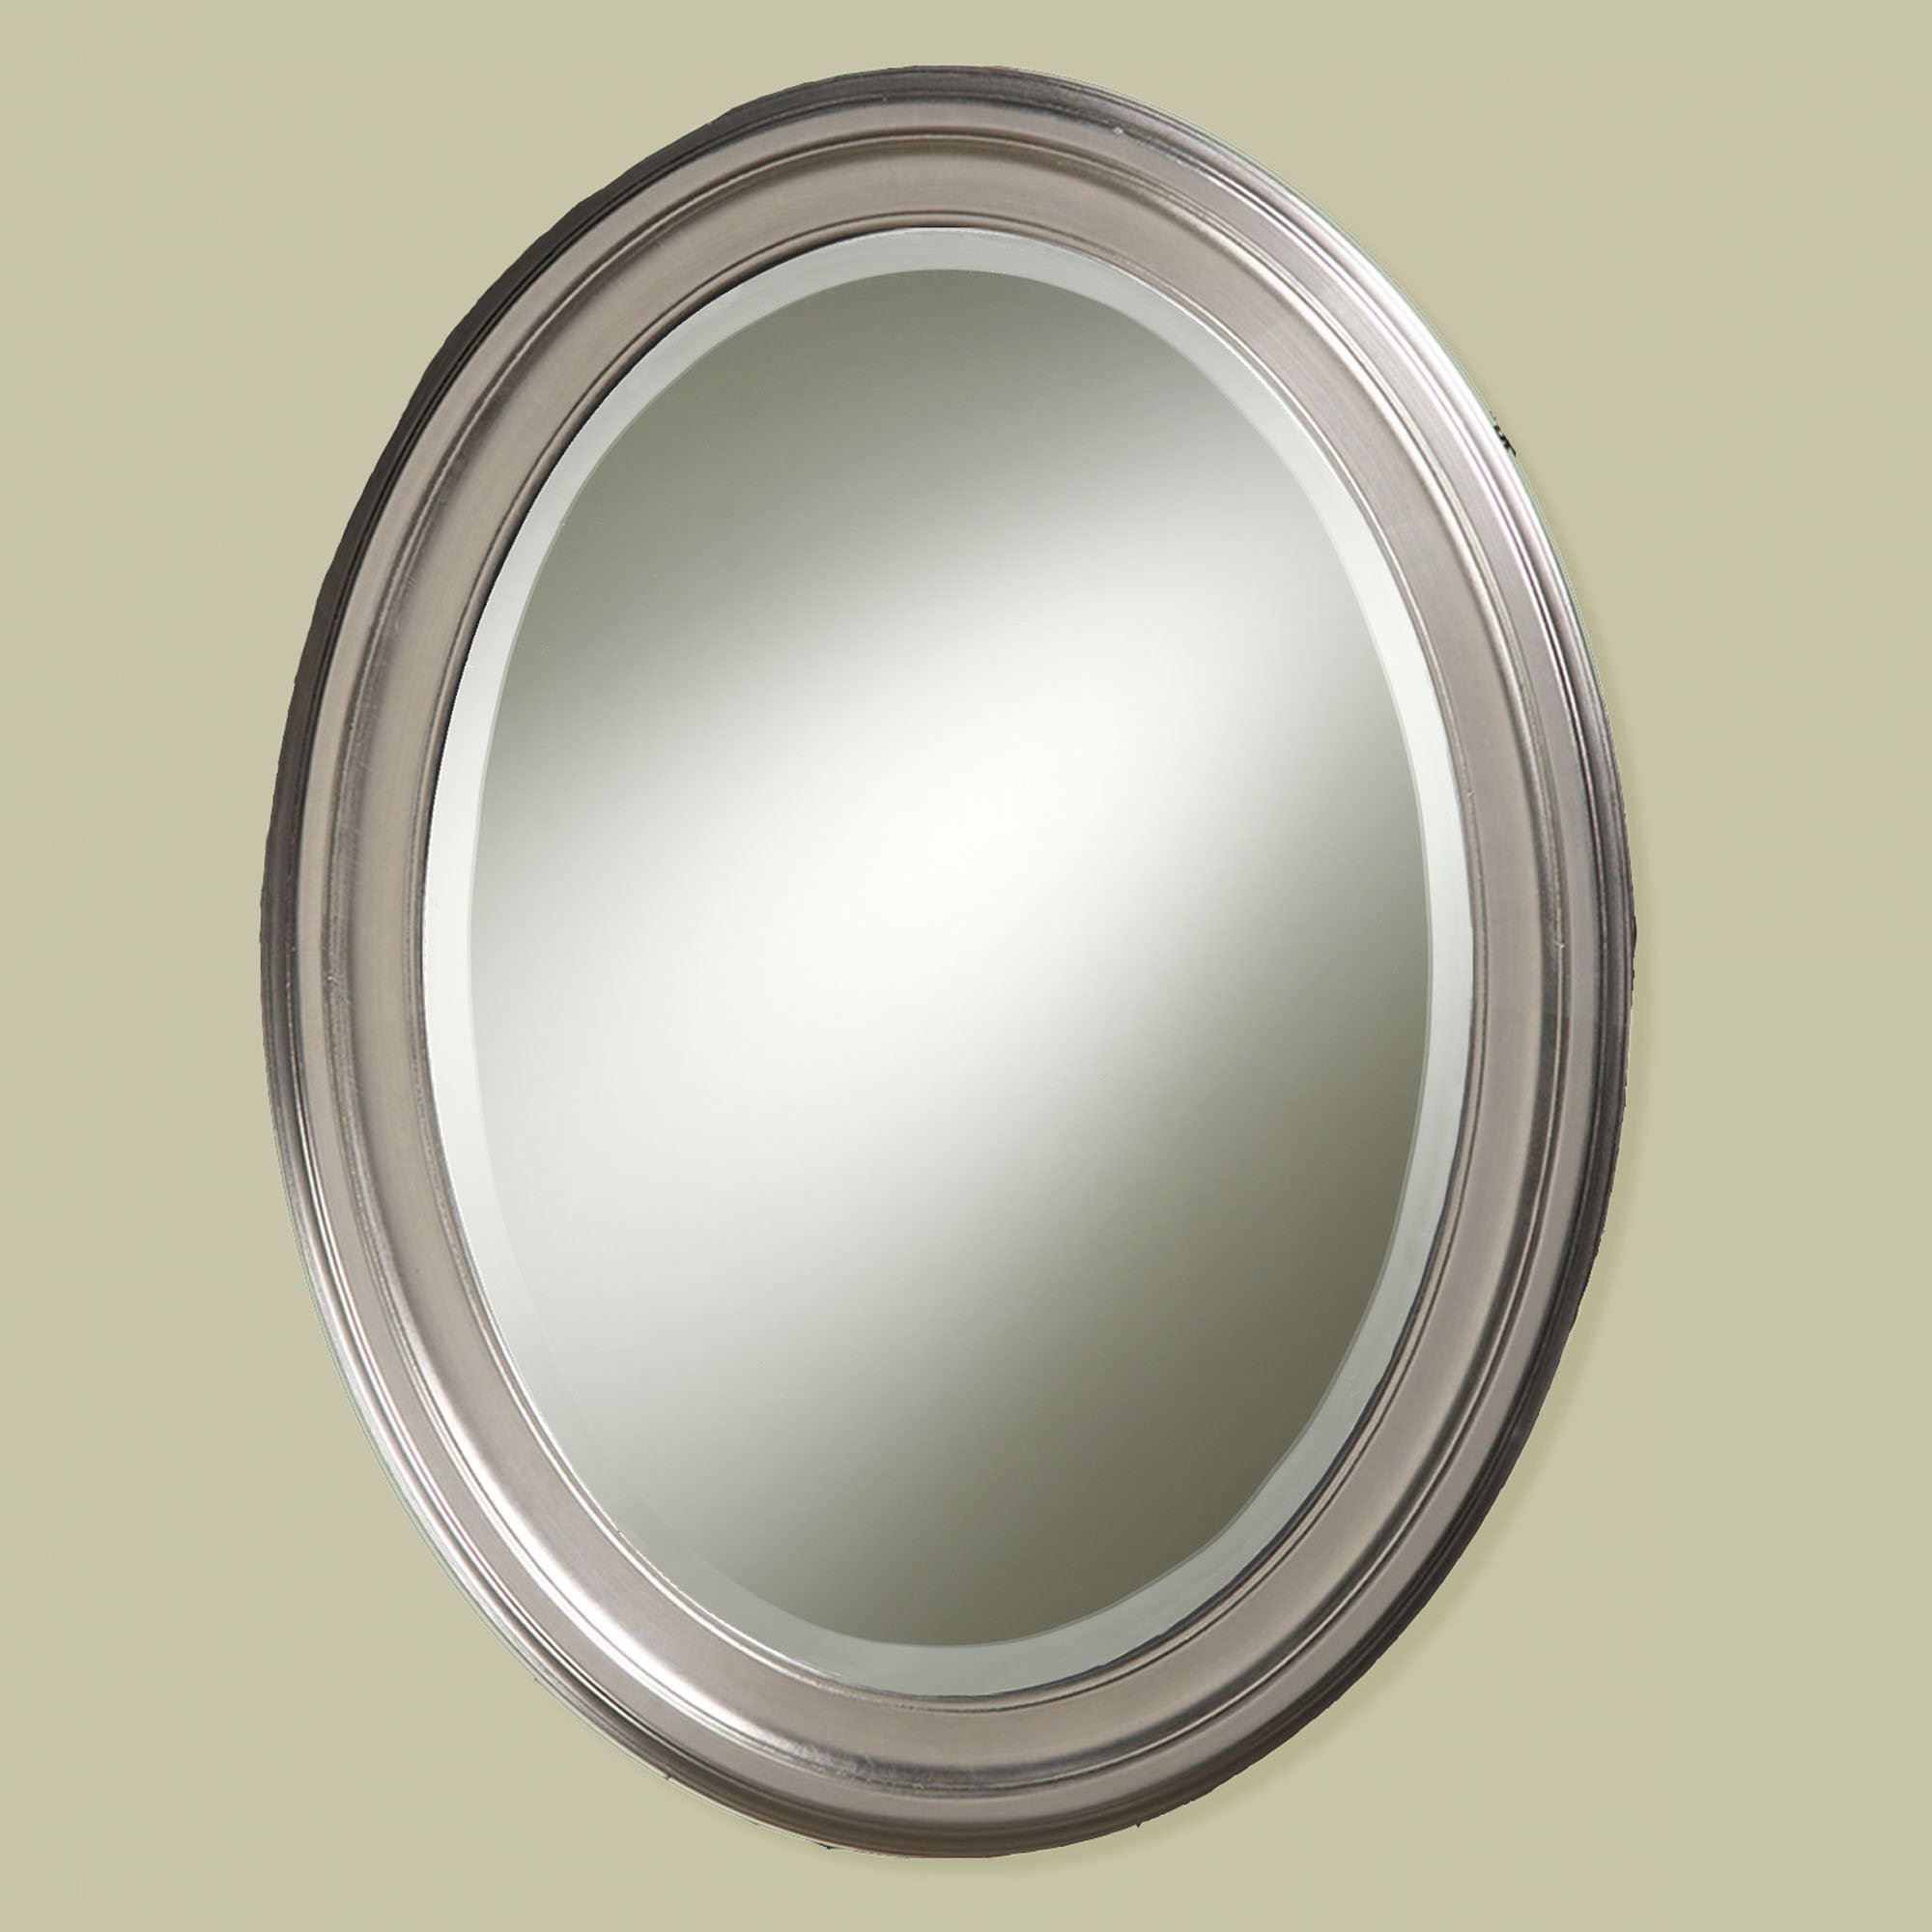 Loree Brushed Nickel Finish Oval Wall Mirror From Howard Elliott Pertaining To Oxidized Nickel Wall Mirrors (View 8 of 15)